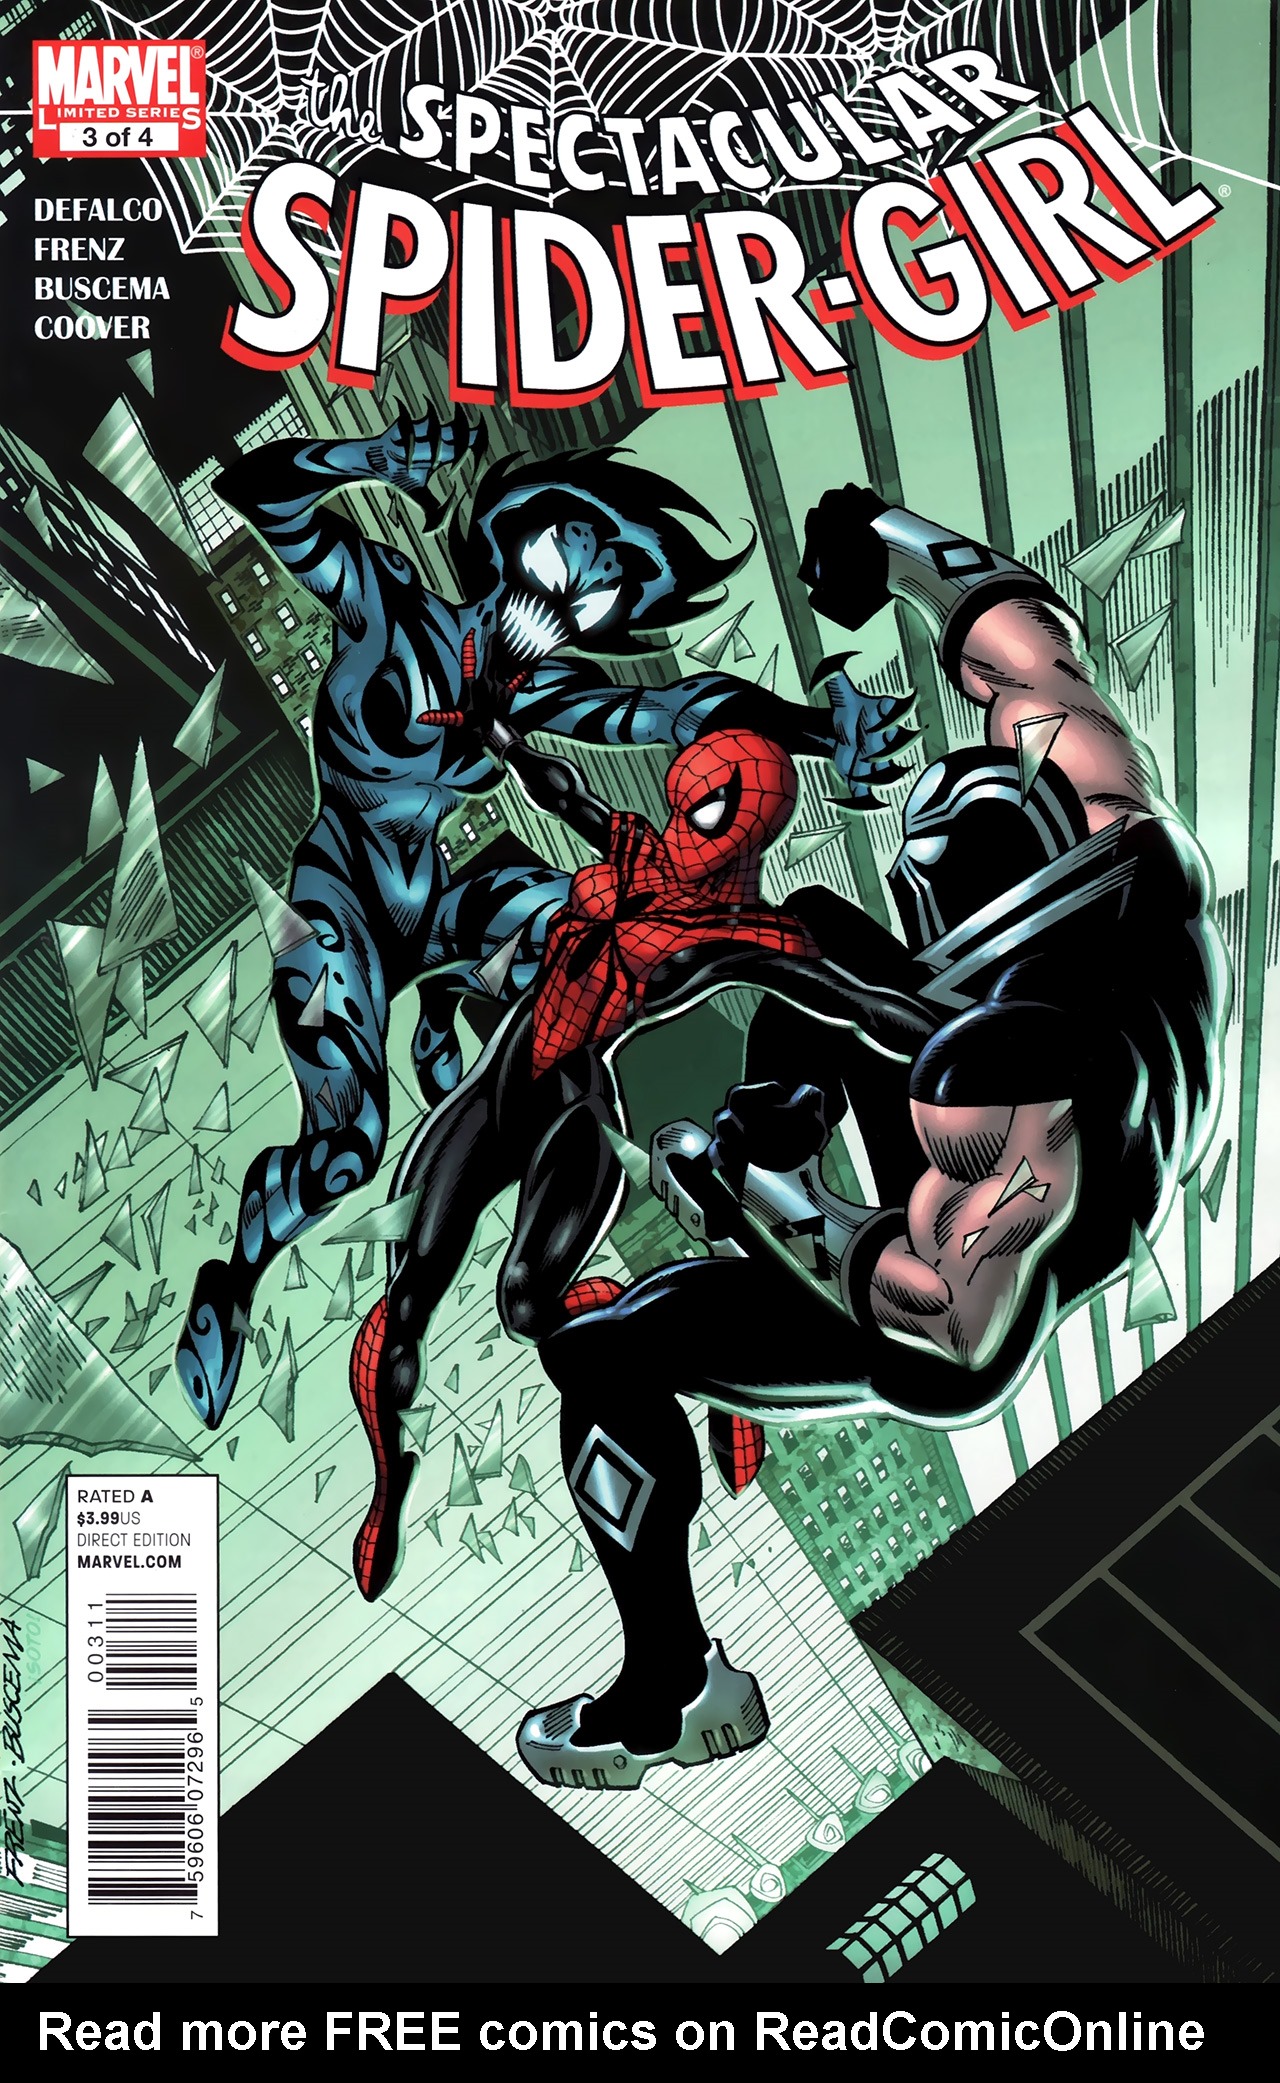 Read online Spectacular Spider-Girl comic -  Issue #3 - 1